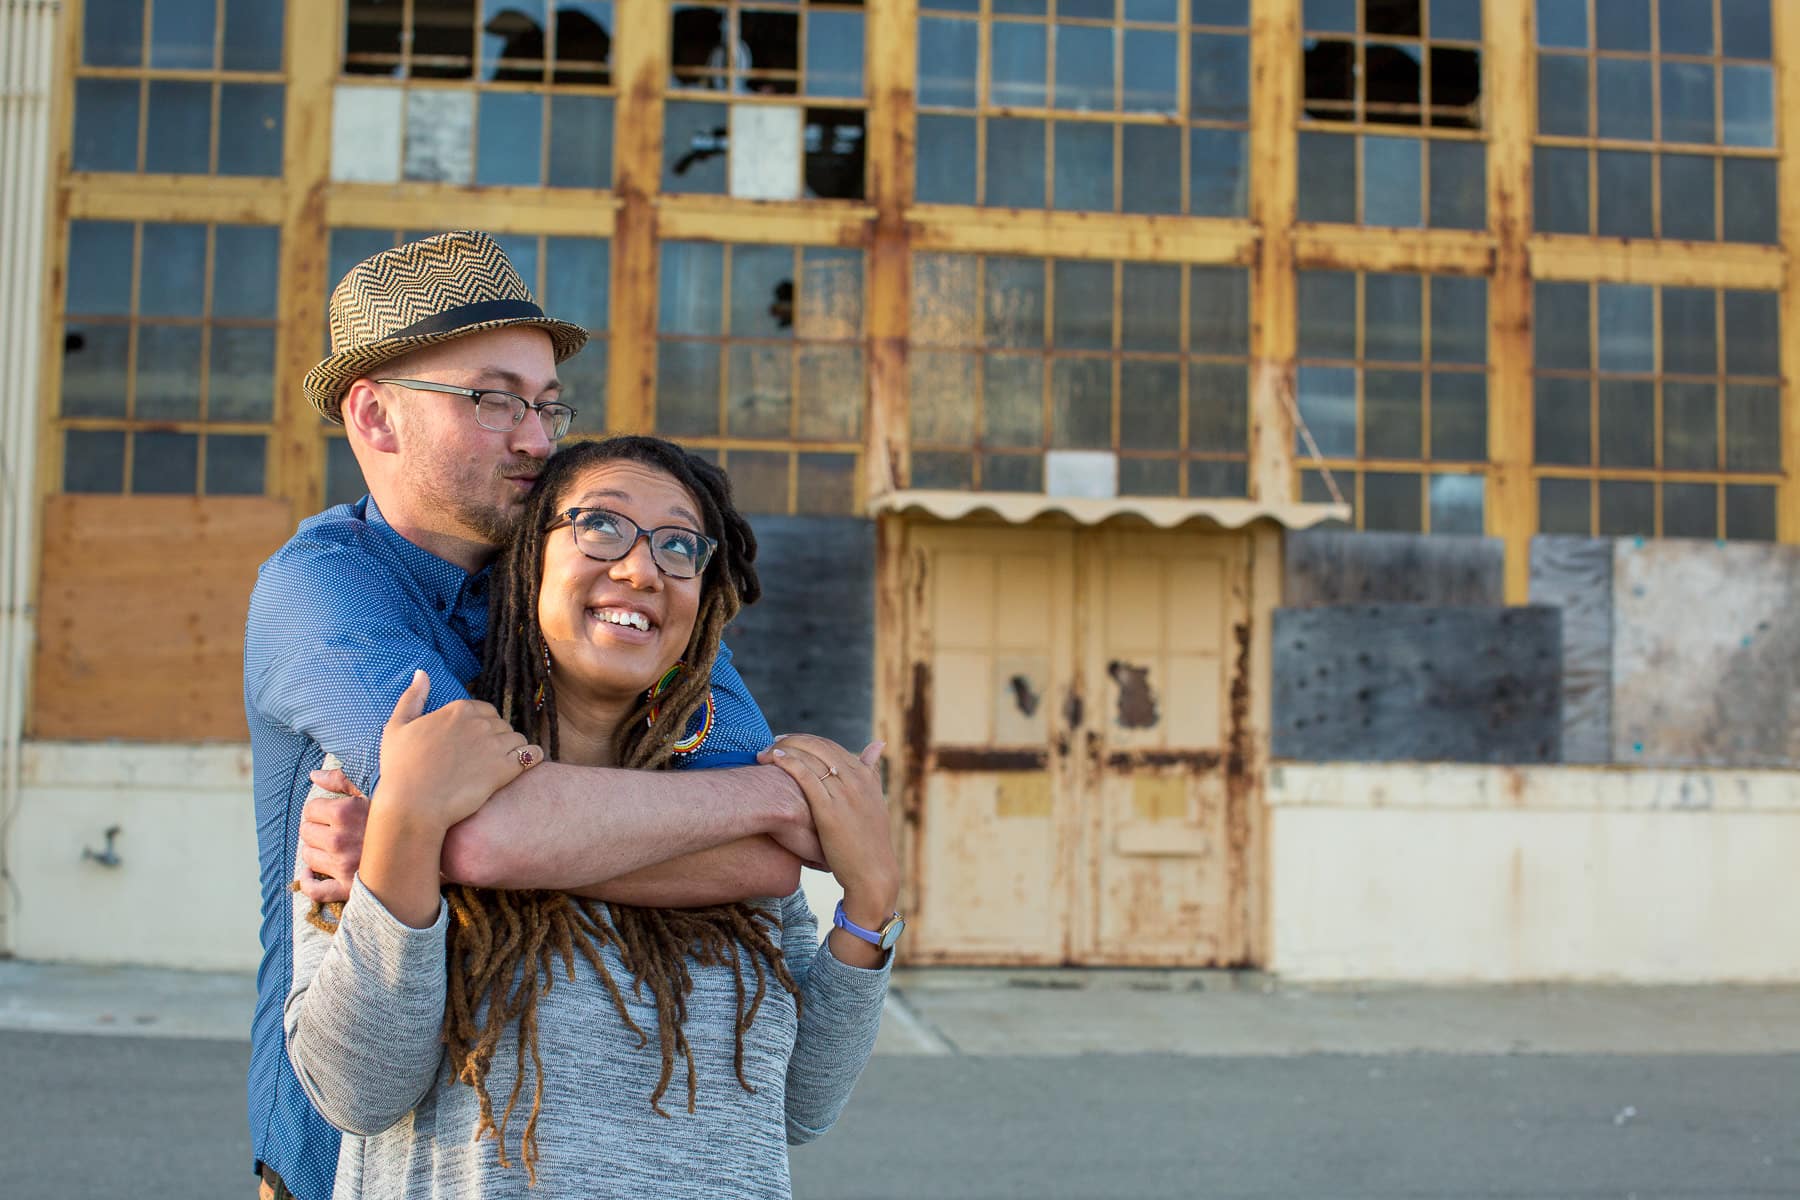 Two people embracing in front of abandoned warehouse